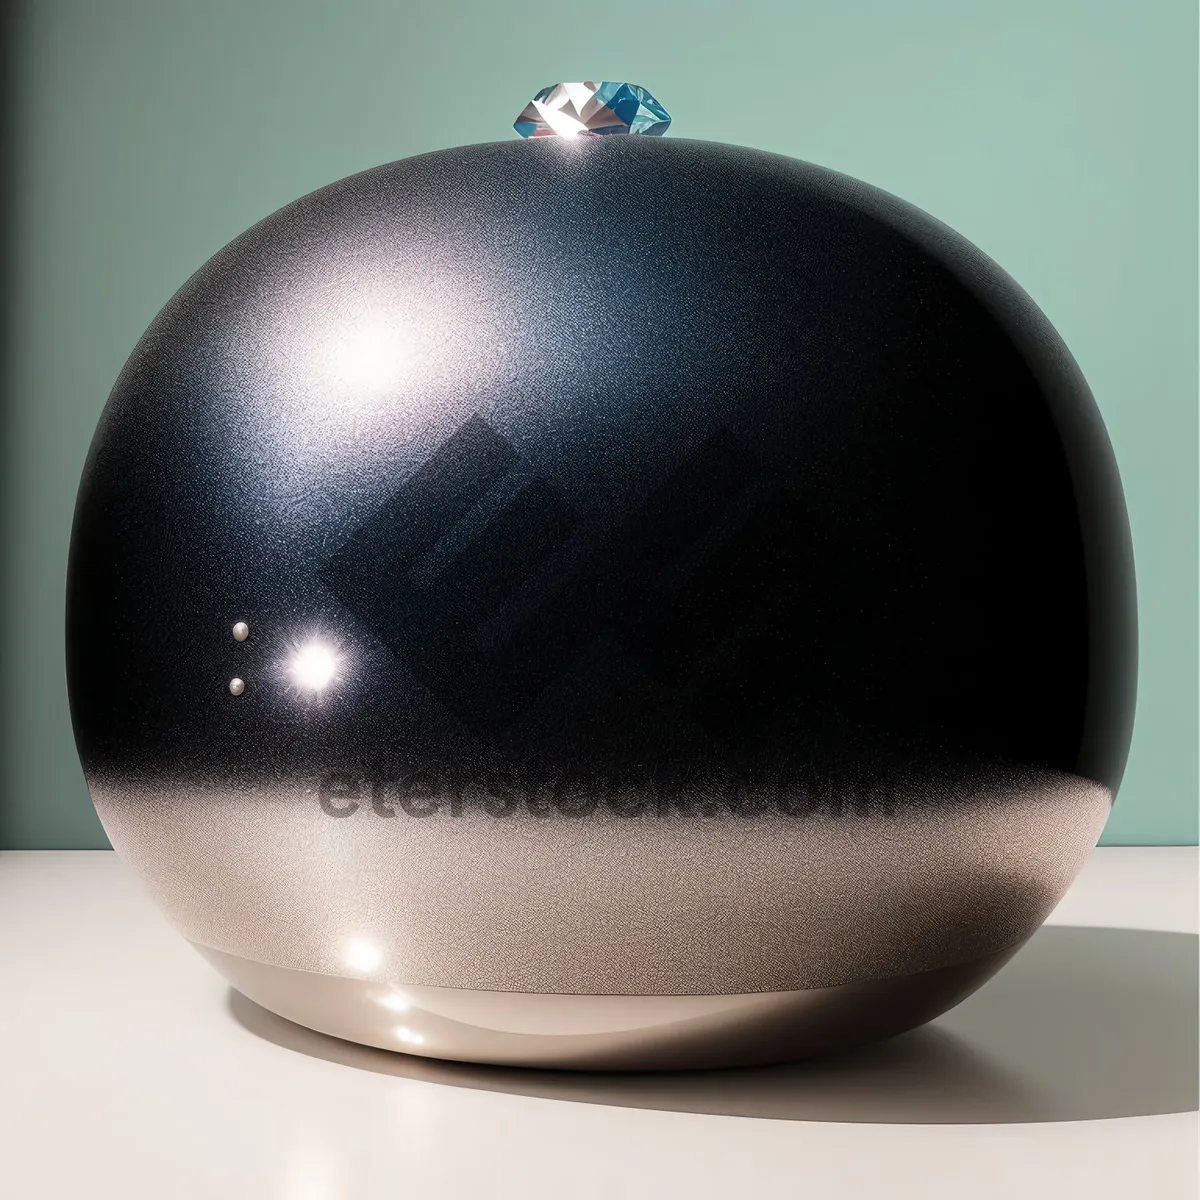 Picture of Shiny Holiday Sphere: Festive Kitchen Utensil Decoration